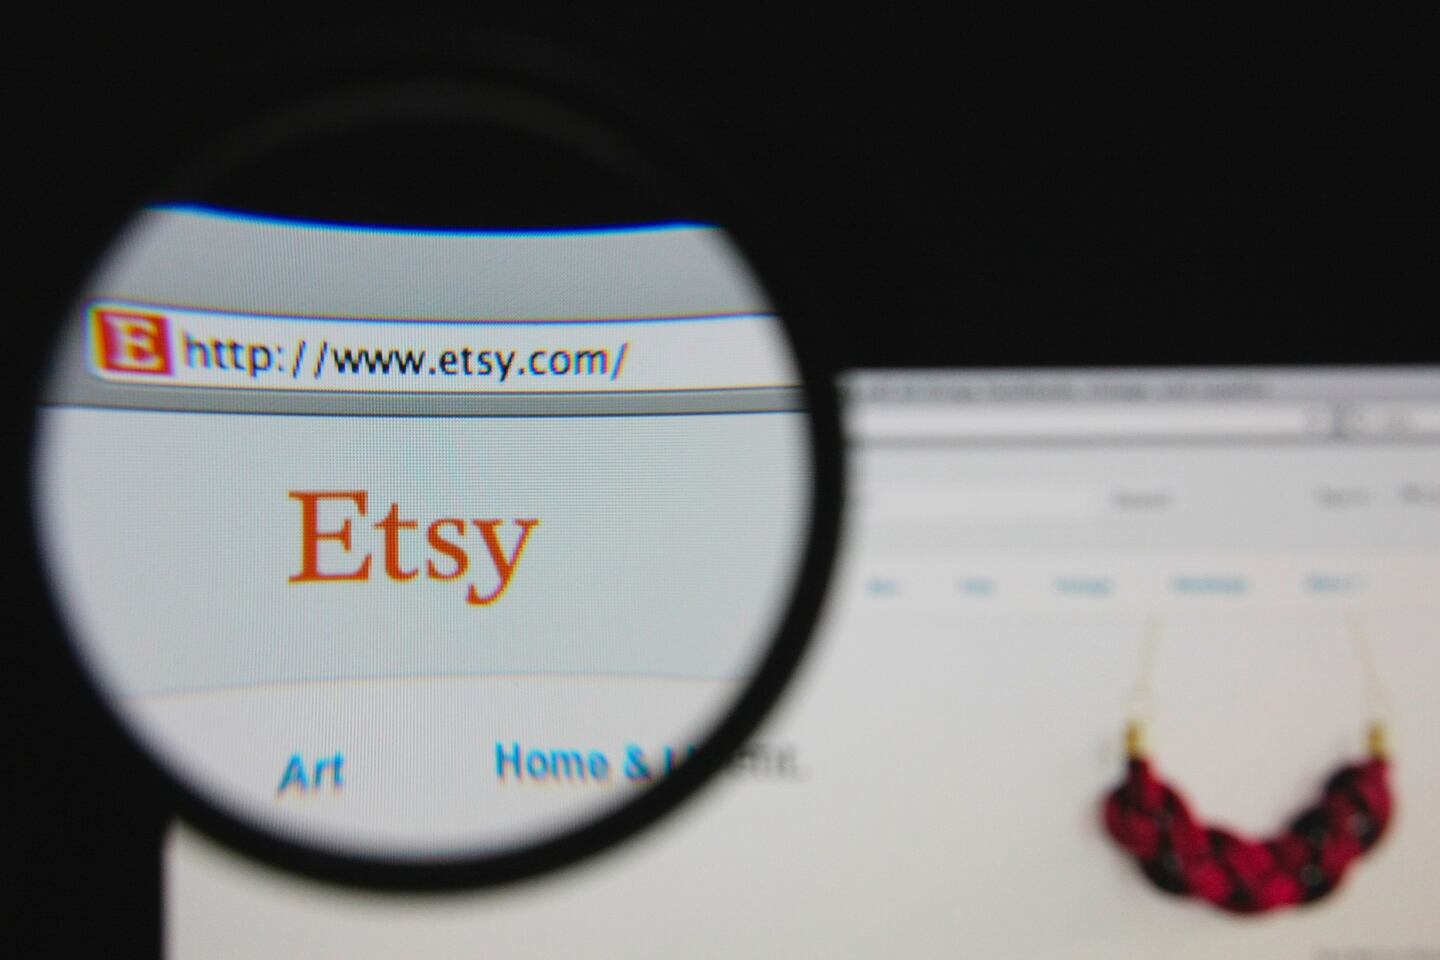 Etsy will lay off 225 people, about 11 percent of total staff, and will incur financial charges of between $25 million and $30 million for severance payments, employee benefits and related costs.